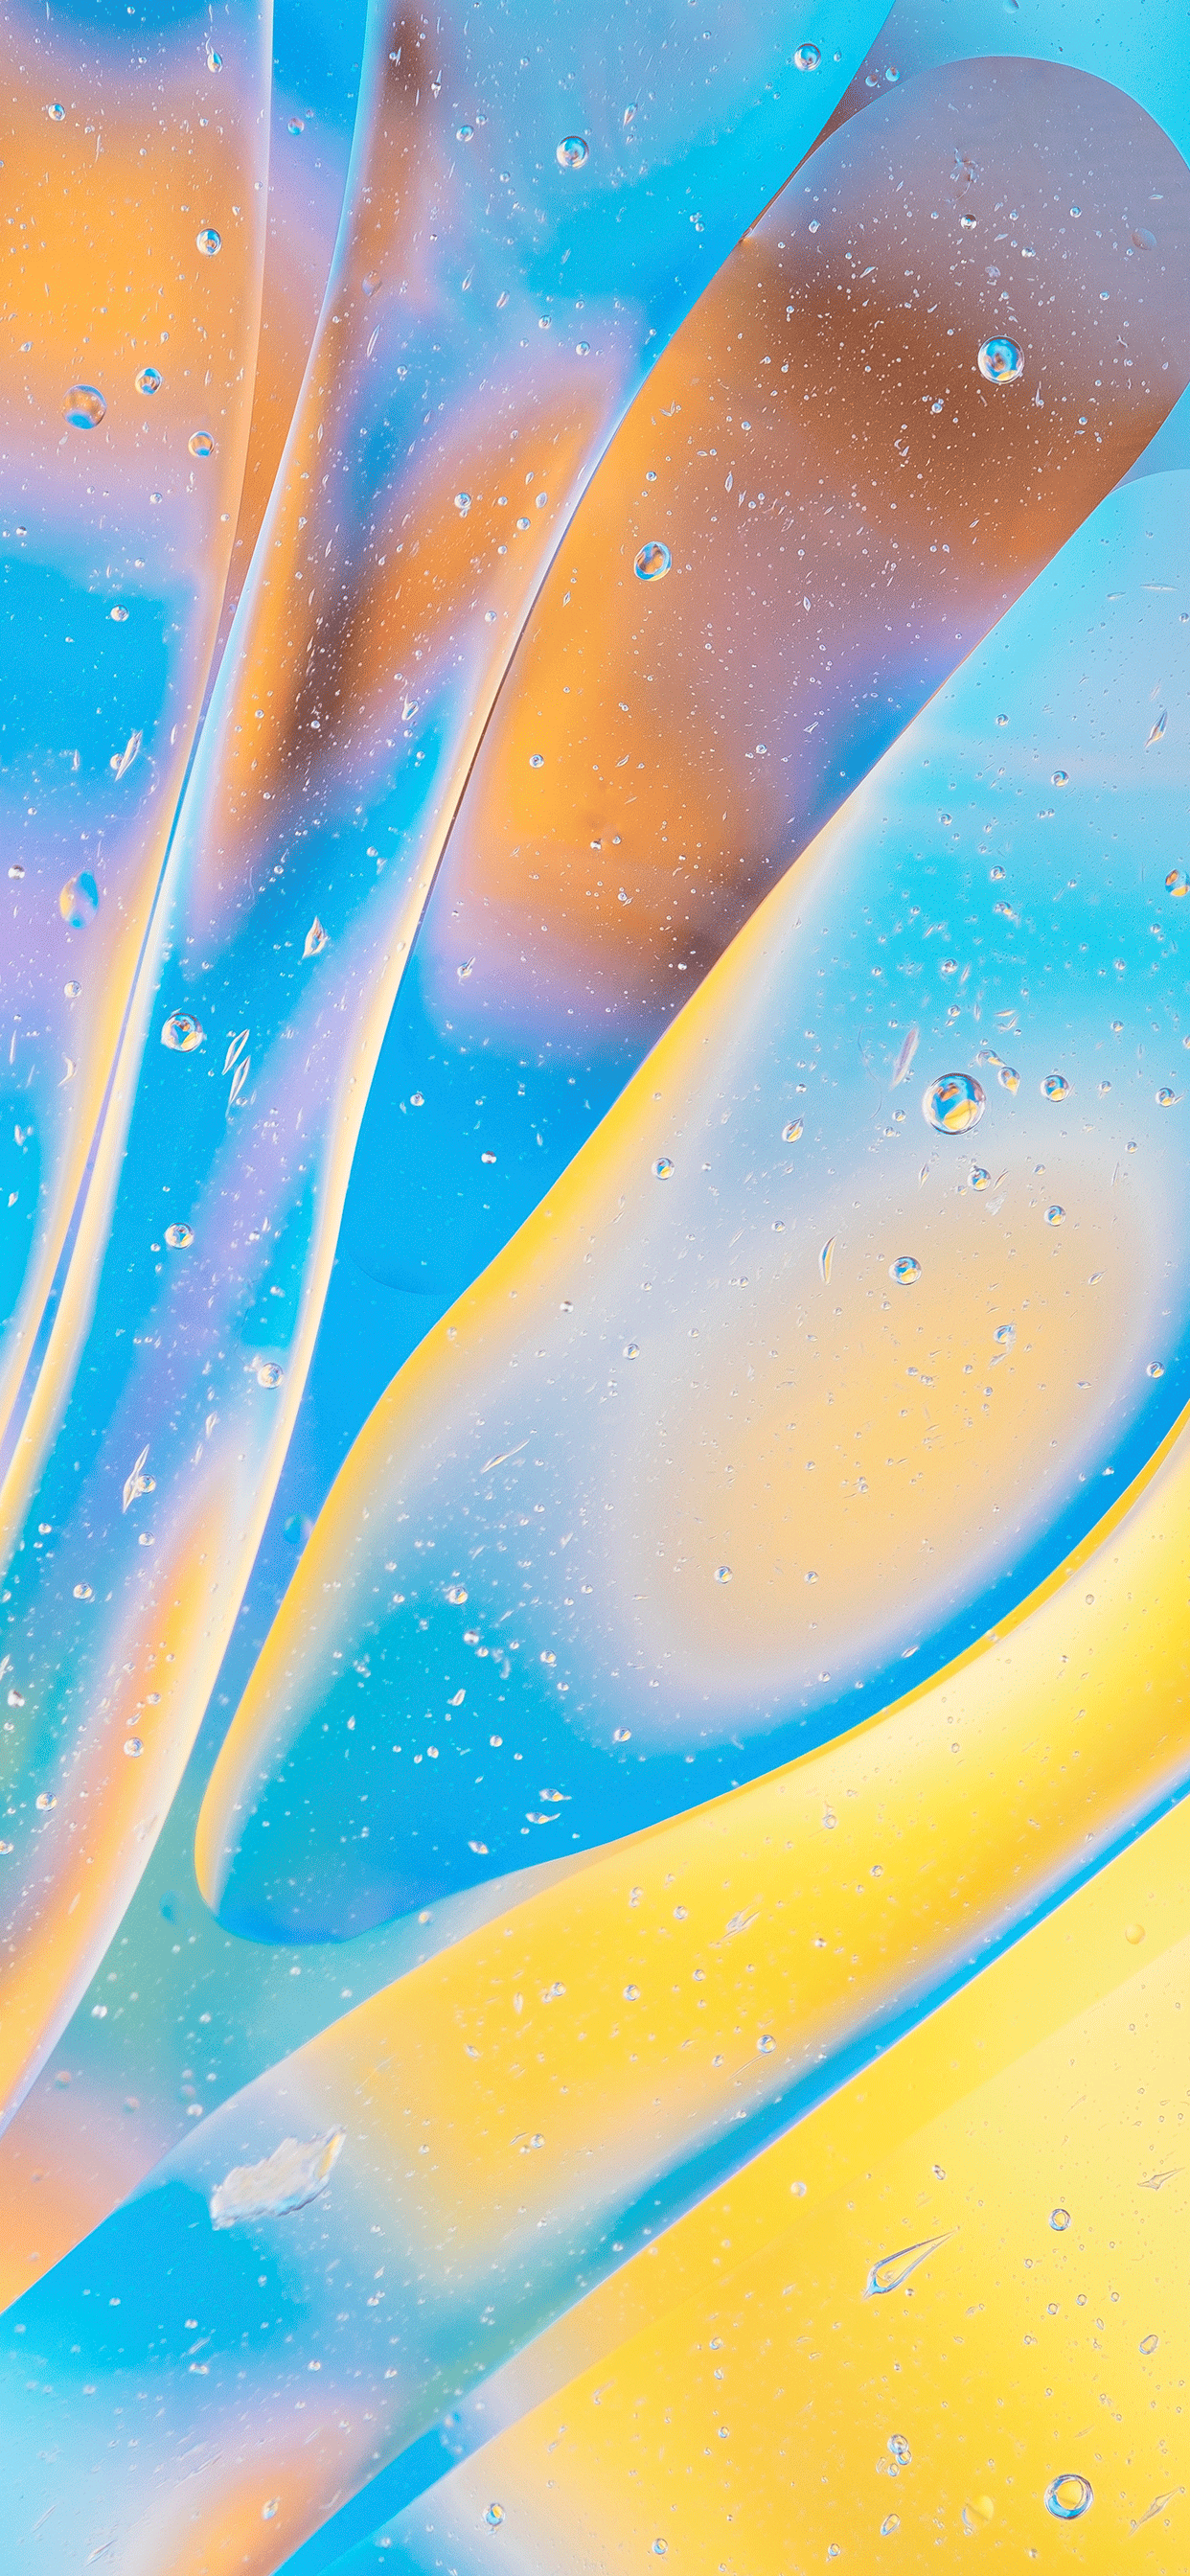 iPhone Wallpaper Abstract Bubbles Blue Abstract And Yellow iPhone Wallpaper & Background Download